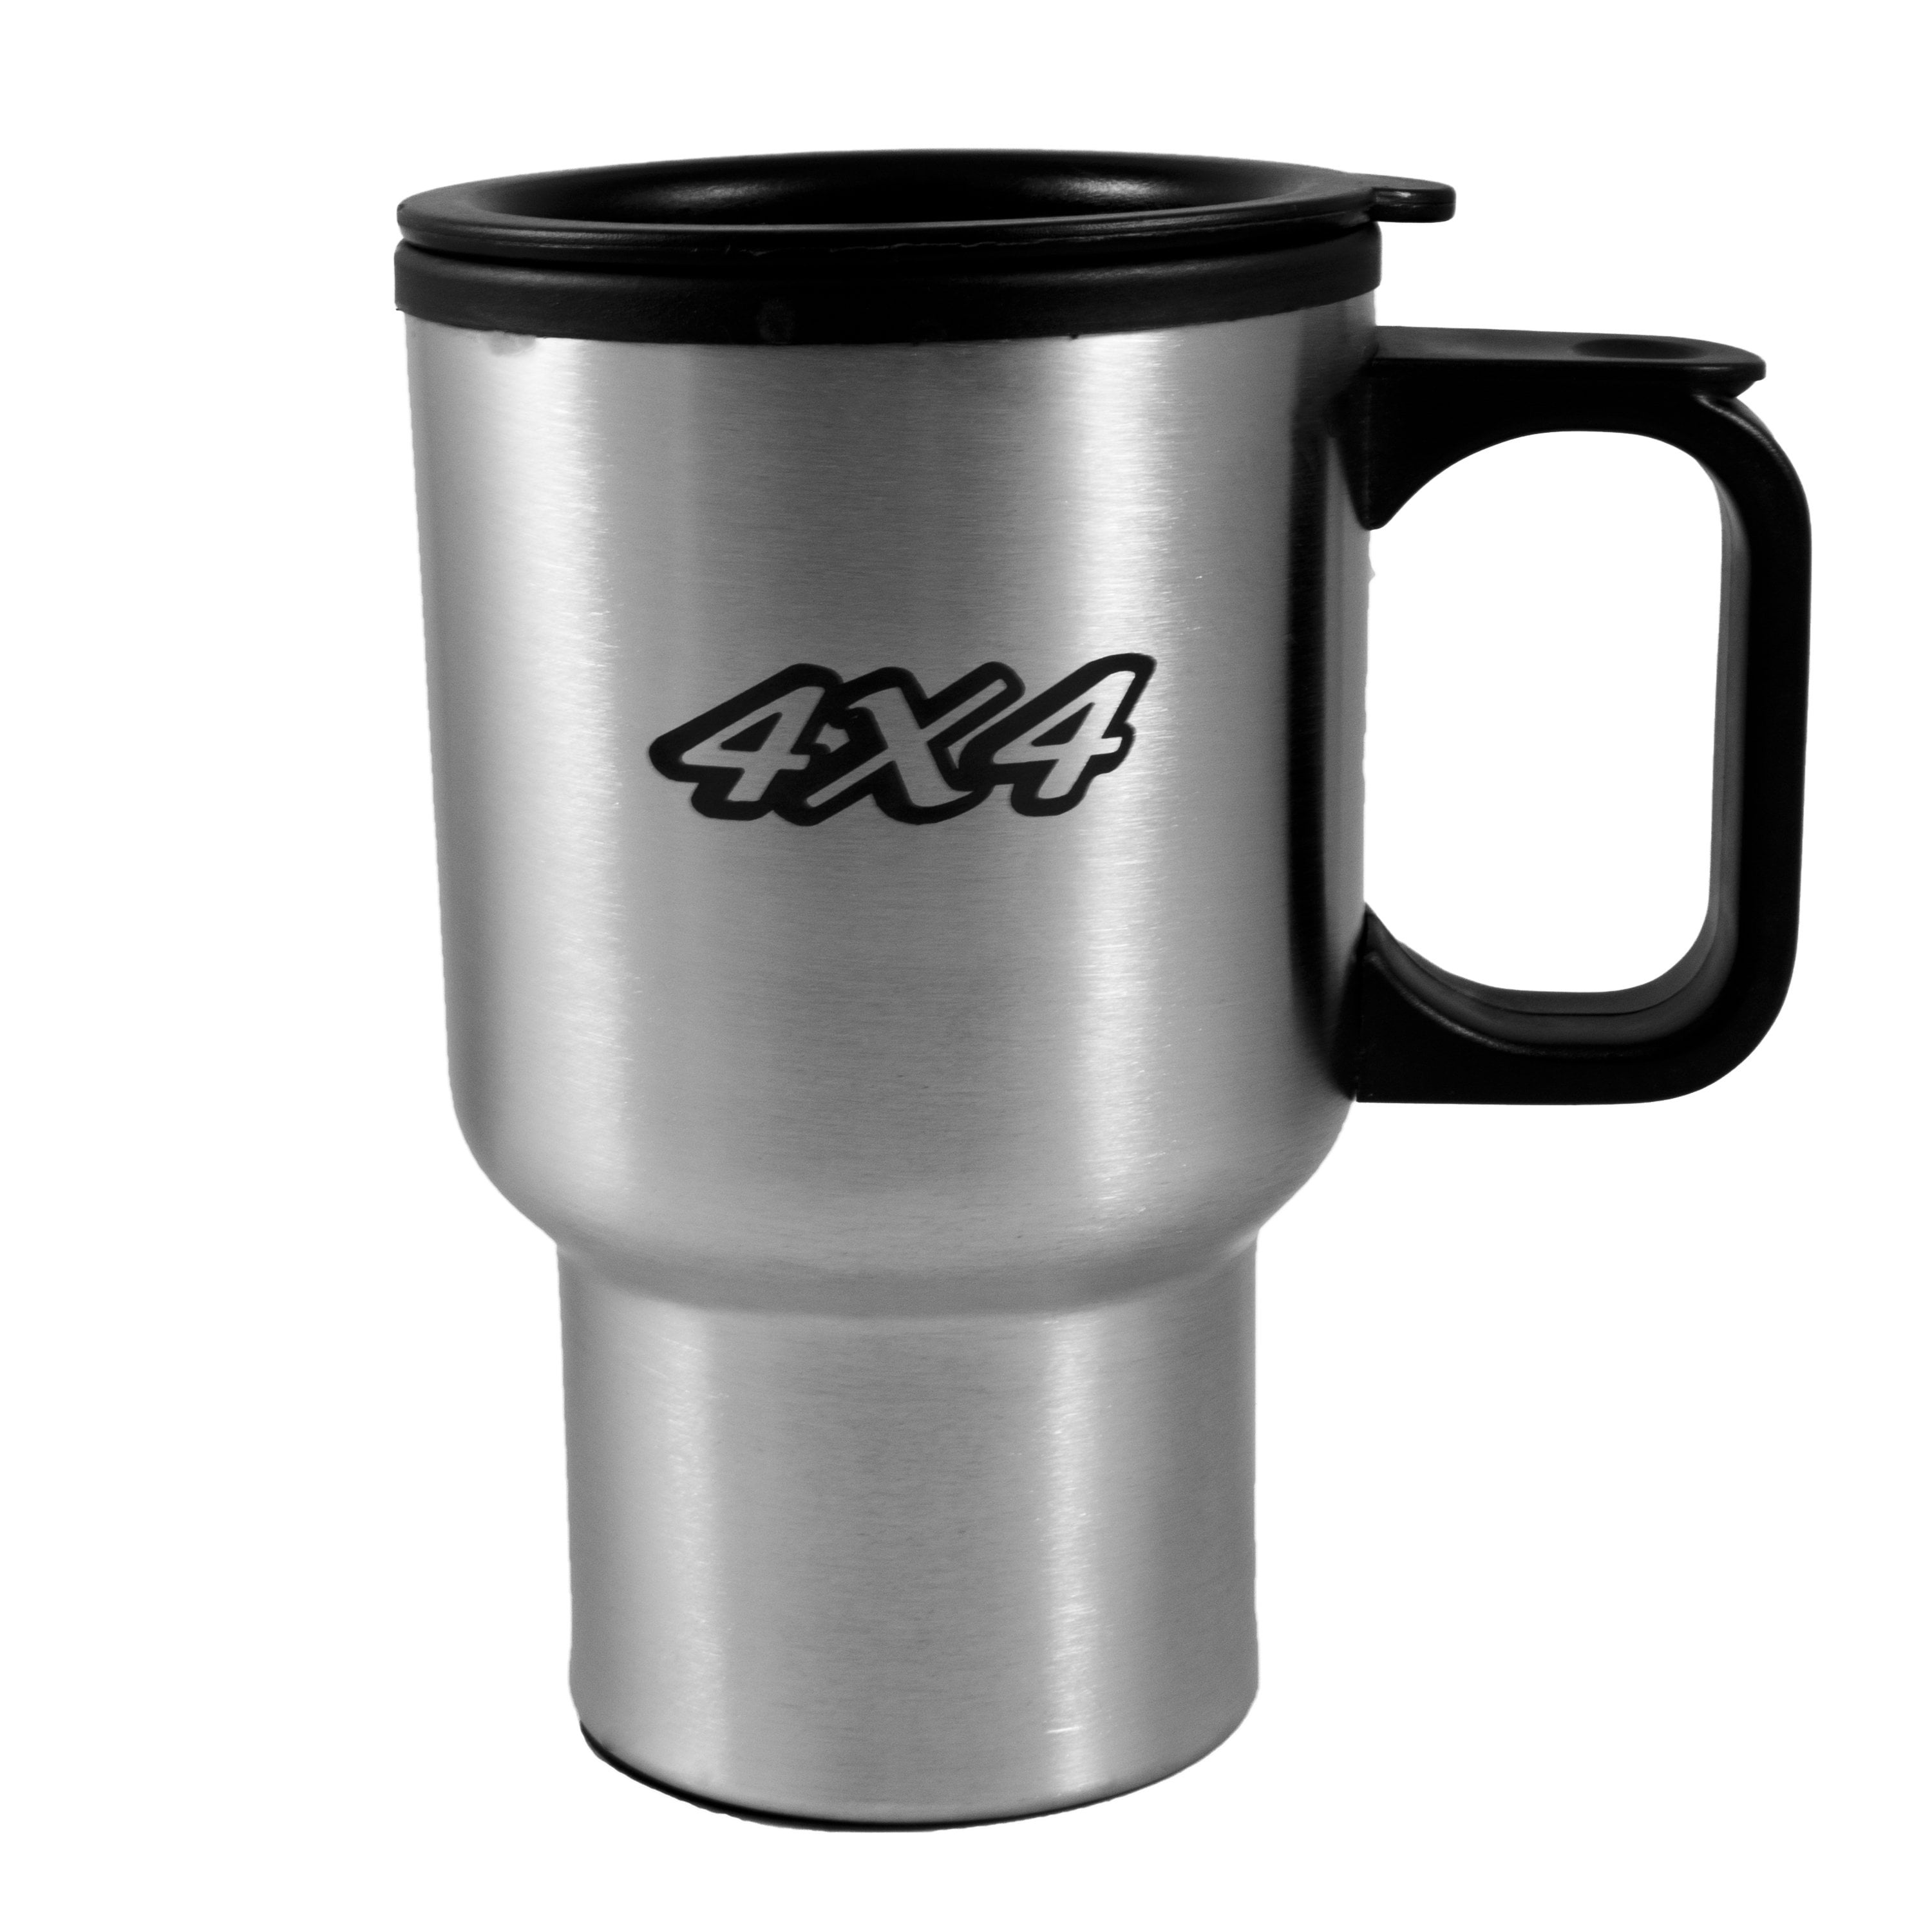 Stainless Steel Mug Cup Insulated Double Wall with Lid Camping Travel Scouts 4WD 